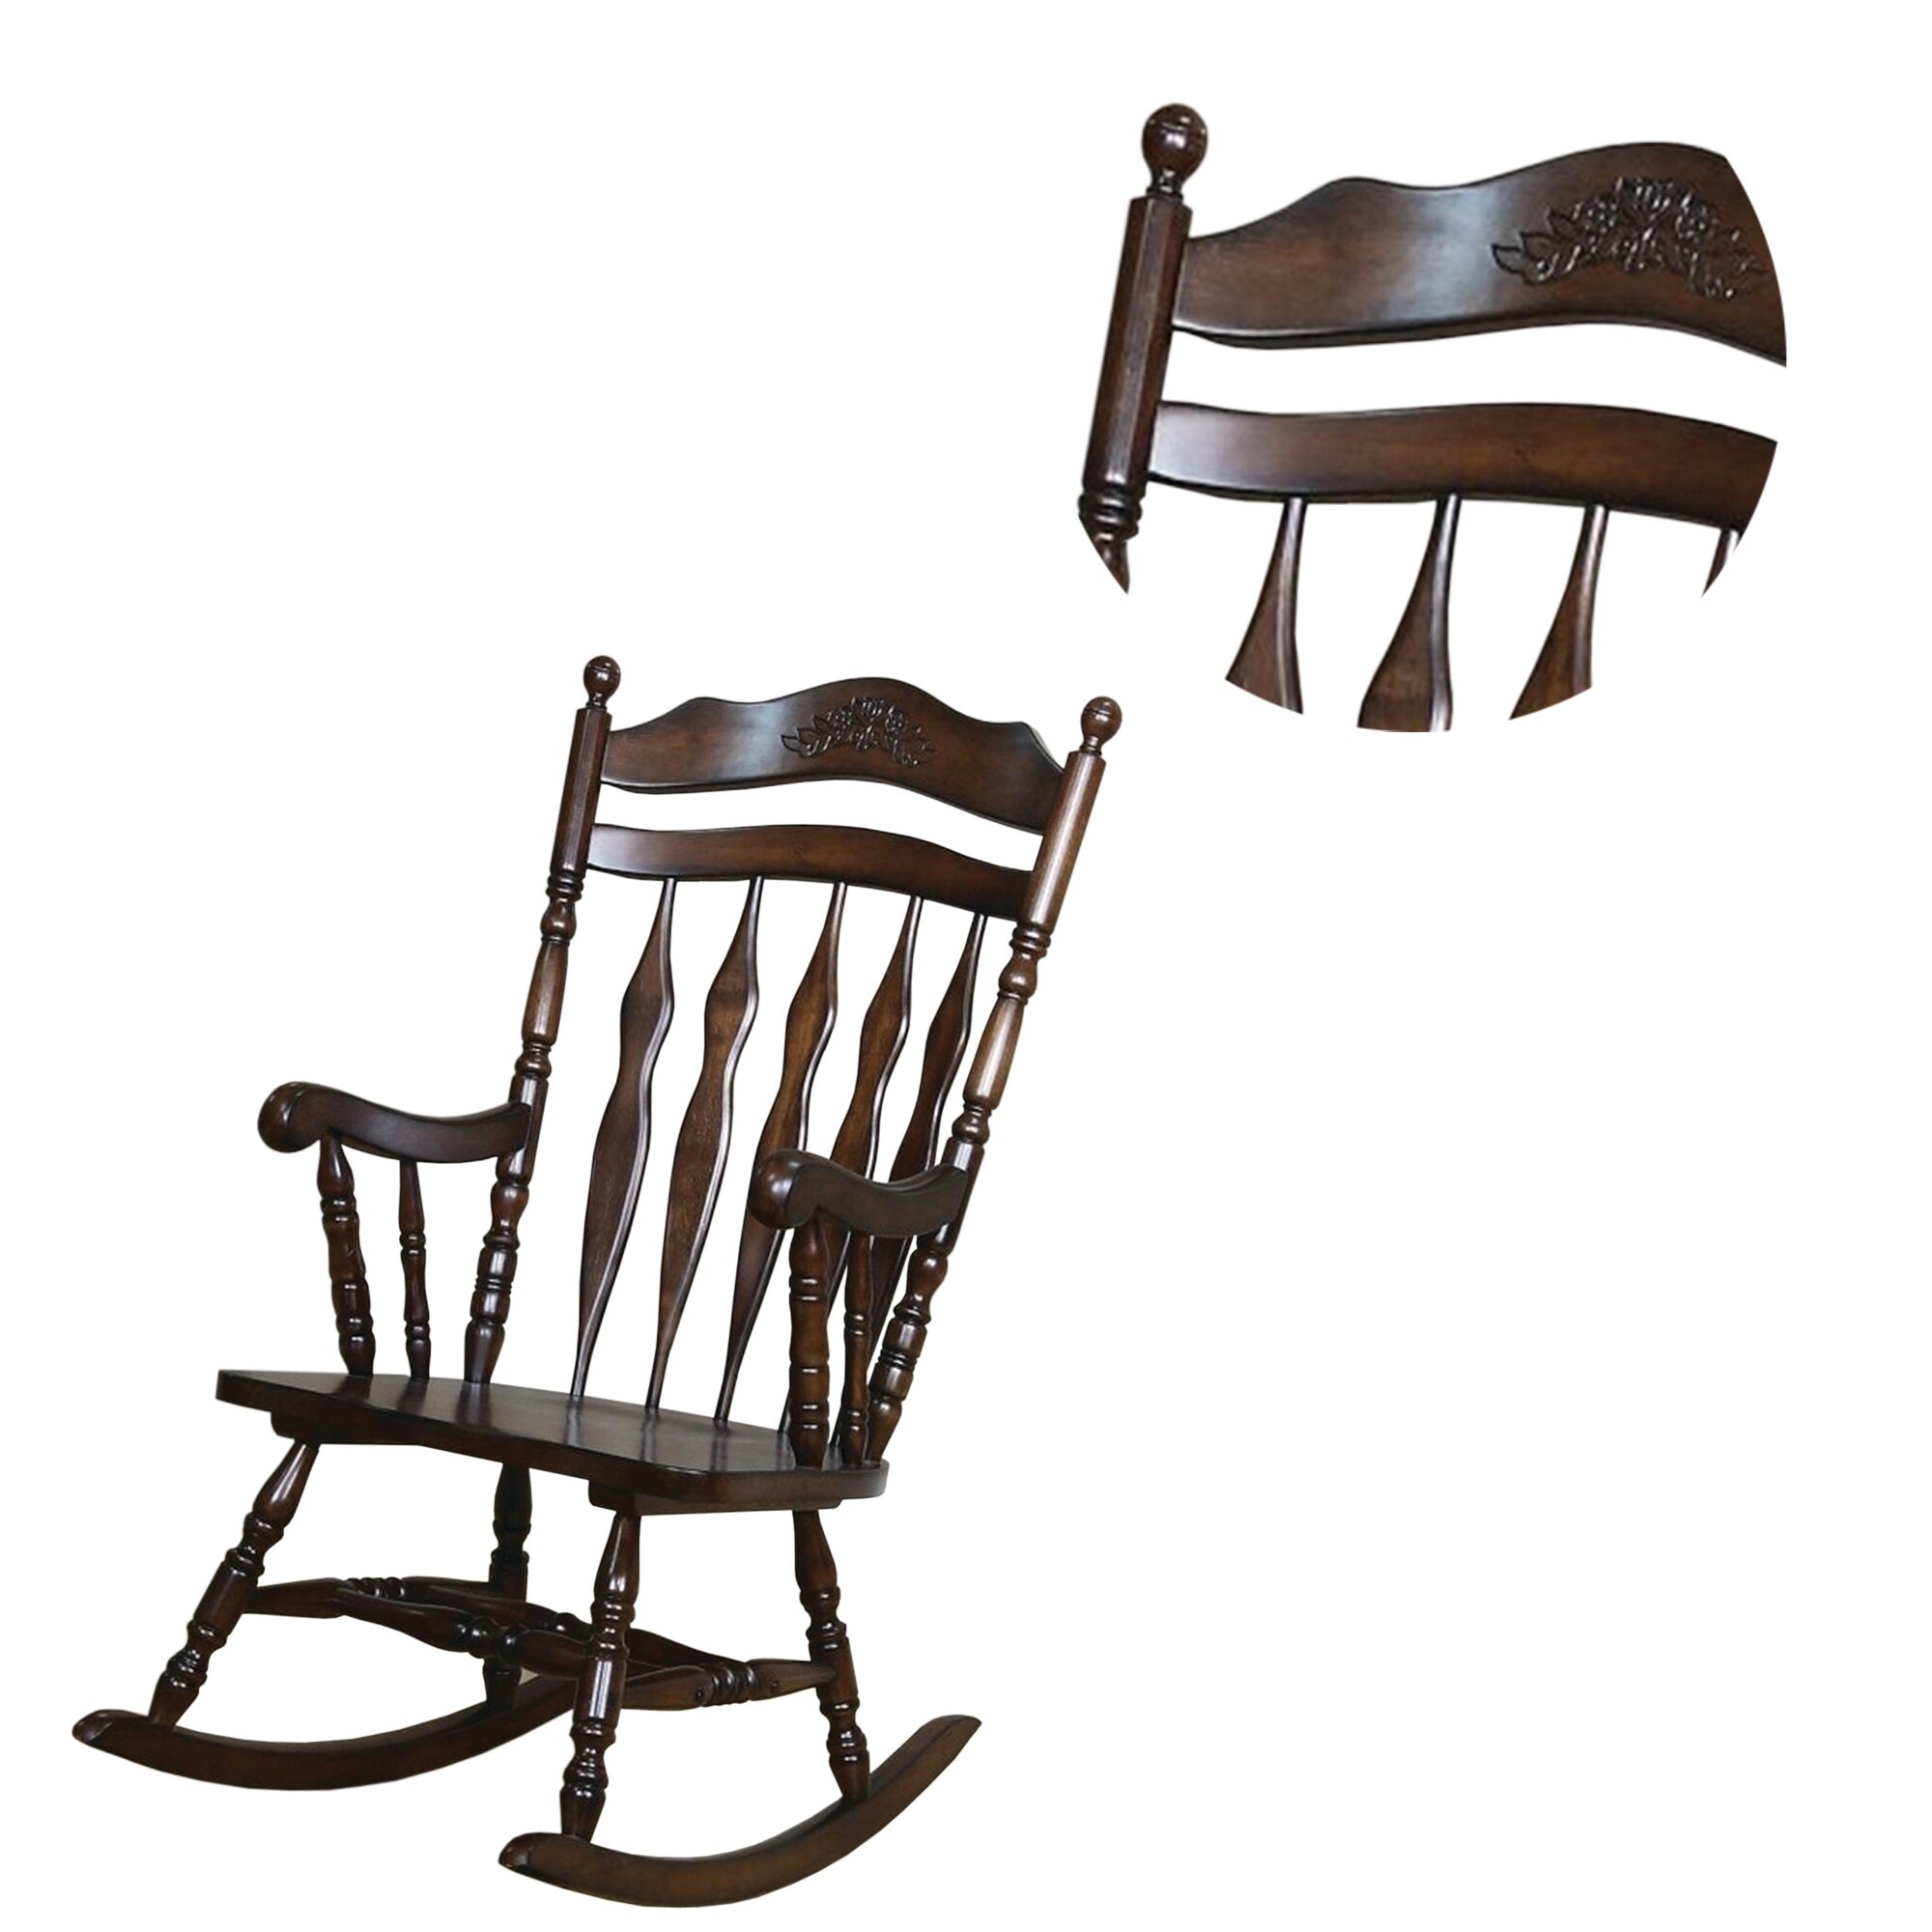 Shop Traditional Windsor Style Wooden Rocking Chair With